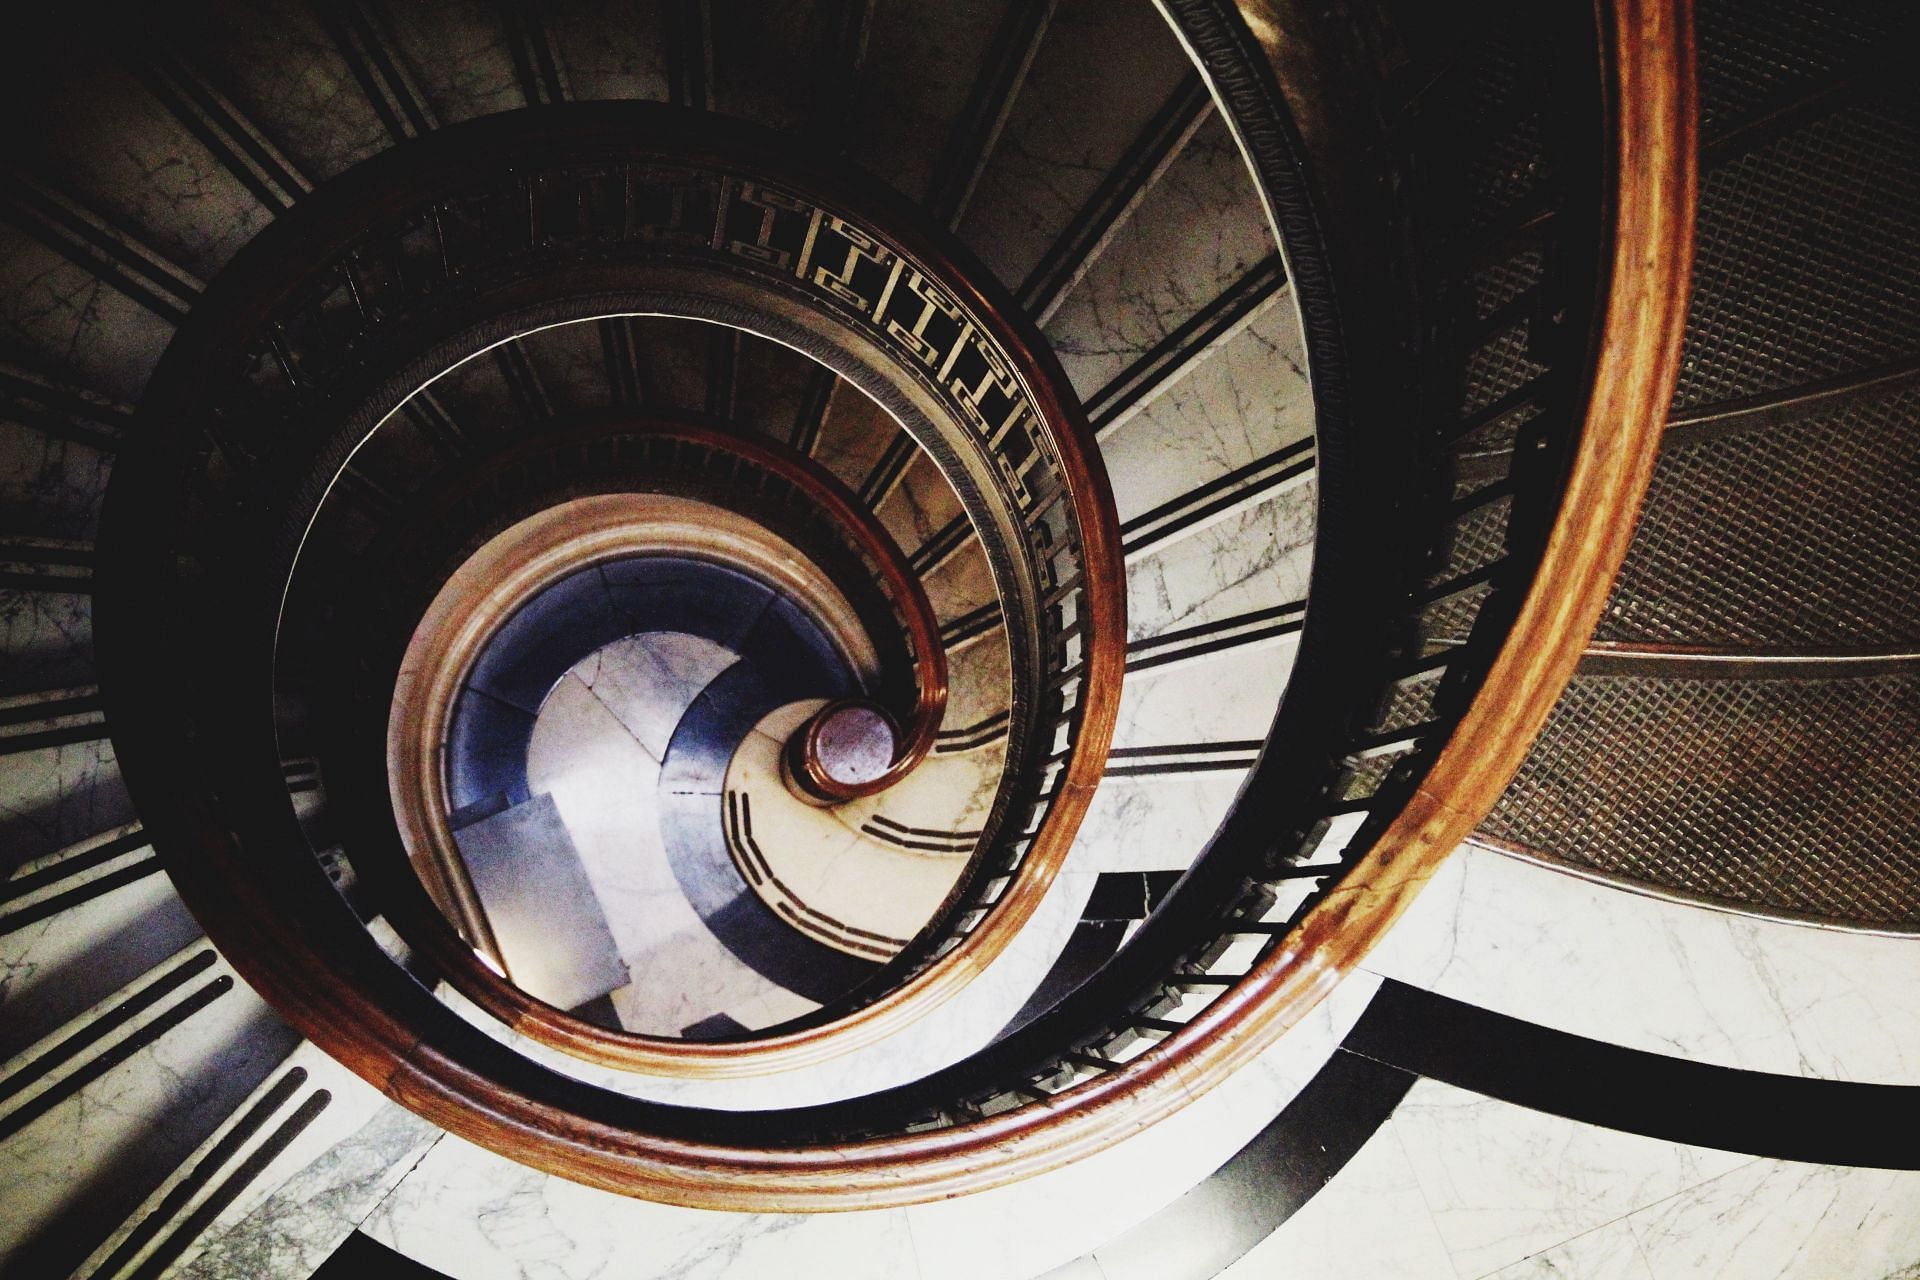 It is important to note that these vertigo maneuvers should only be performed under the supervision of a healthcare provider. (Photo by Giorgio Trovato on Unsplash)